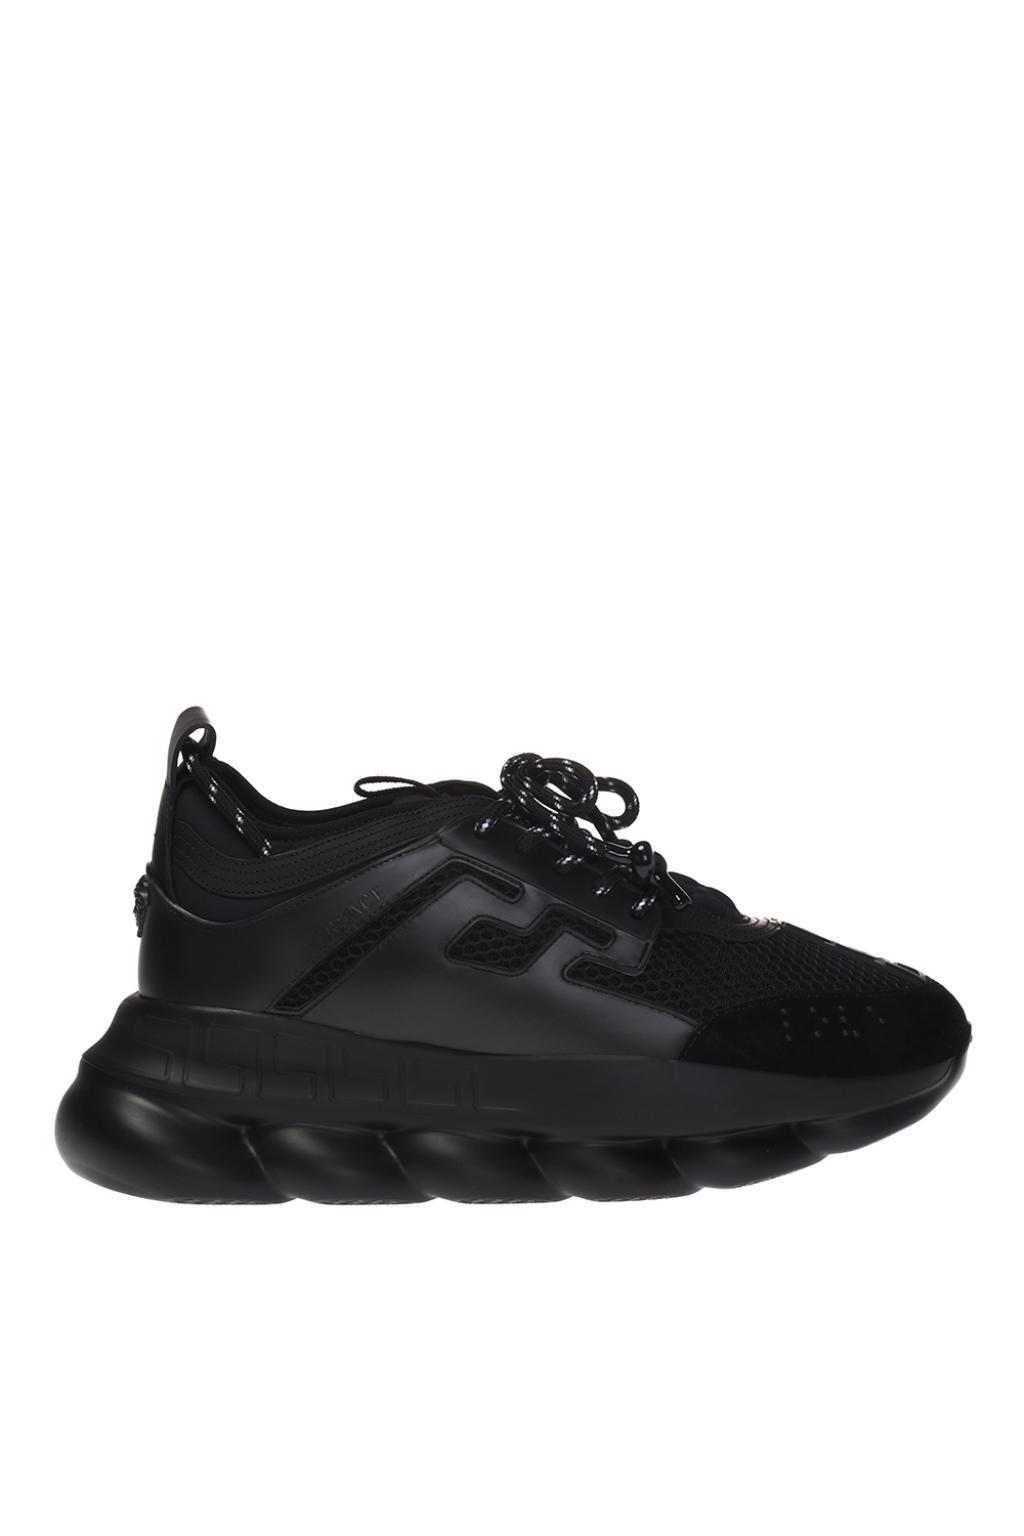 Versace Rubber Medusa Head Sneakers in Black for Men - Save 3% - Lyst